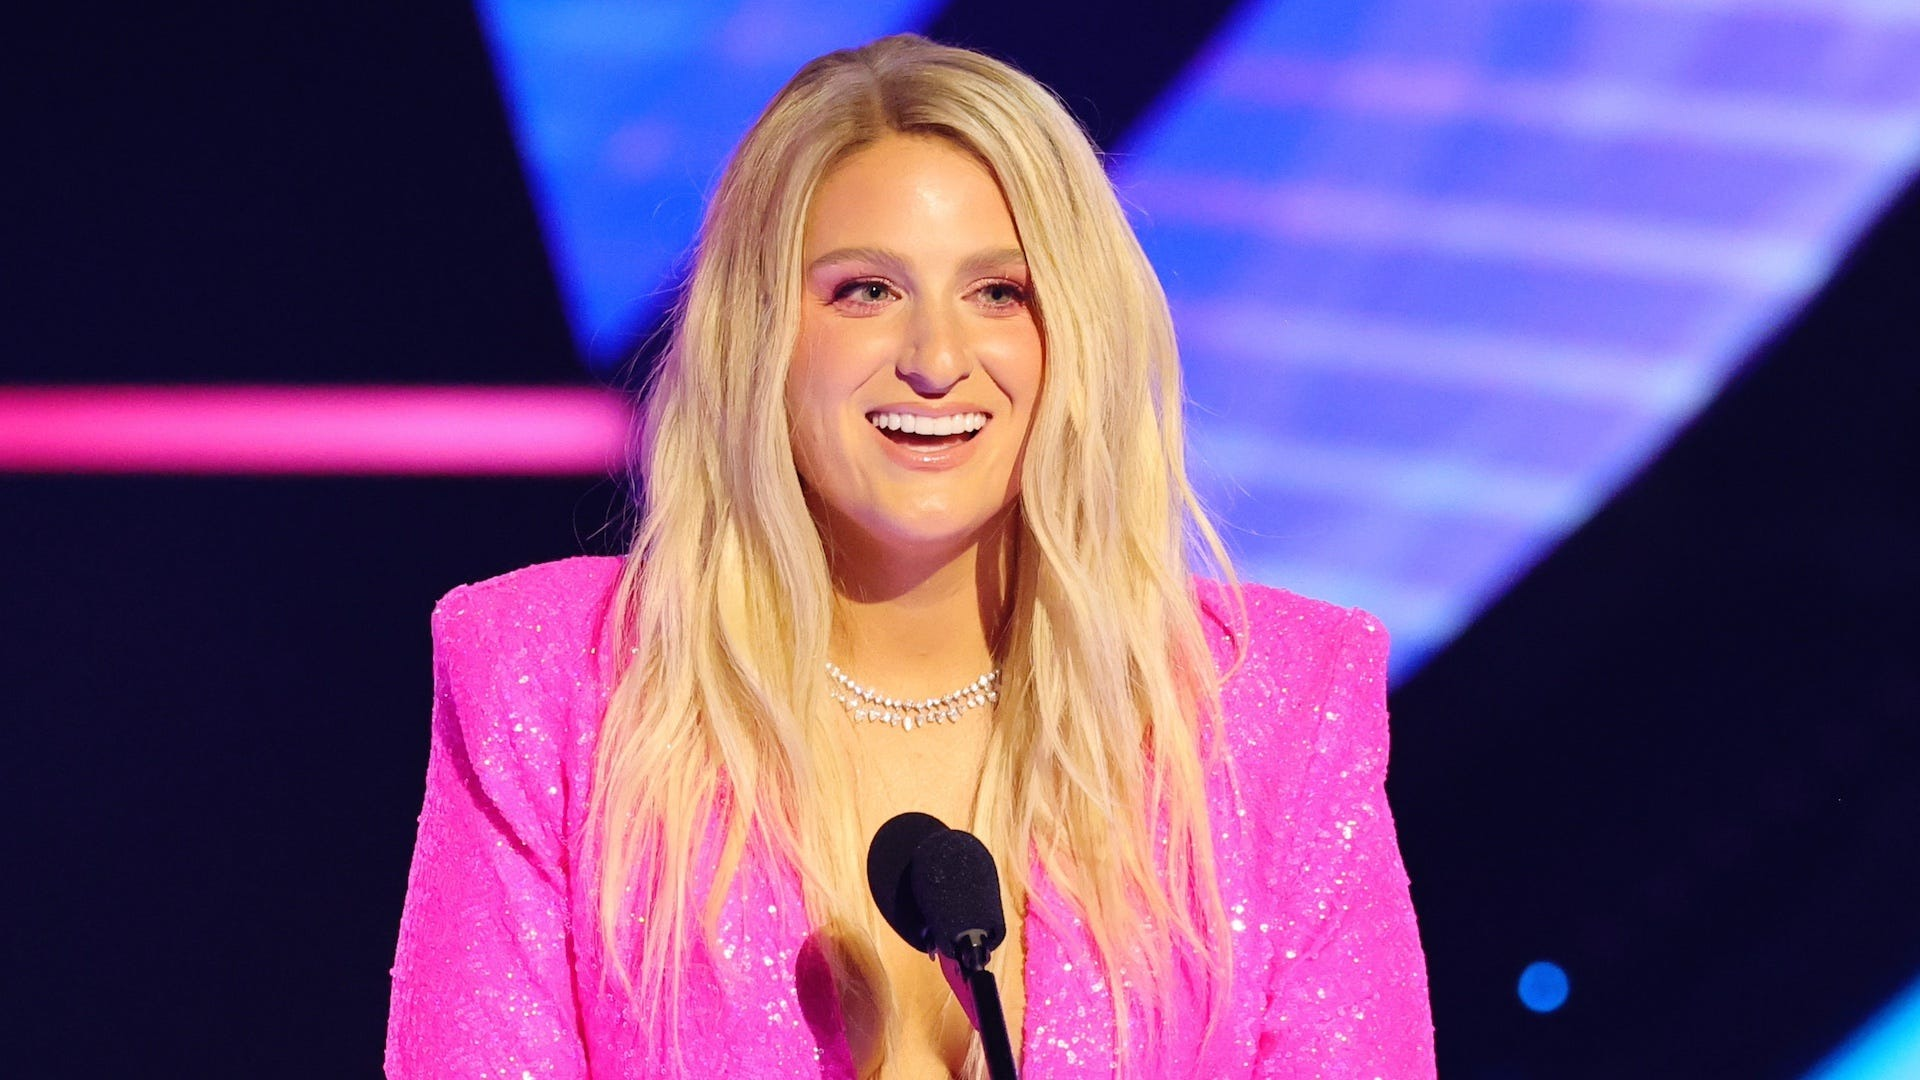 Meghan Trainor on Parenting, Social Media, and More